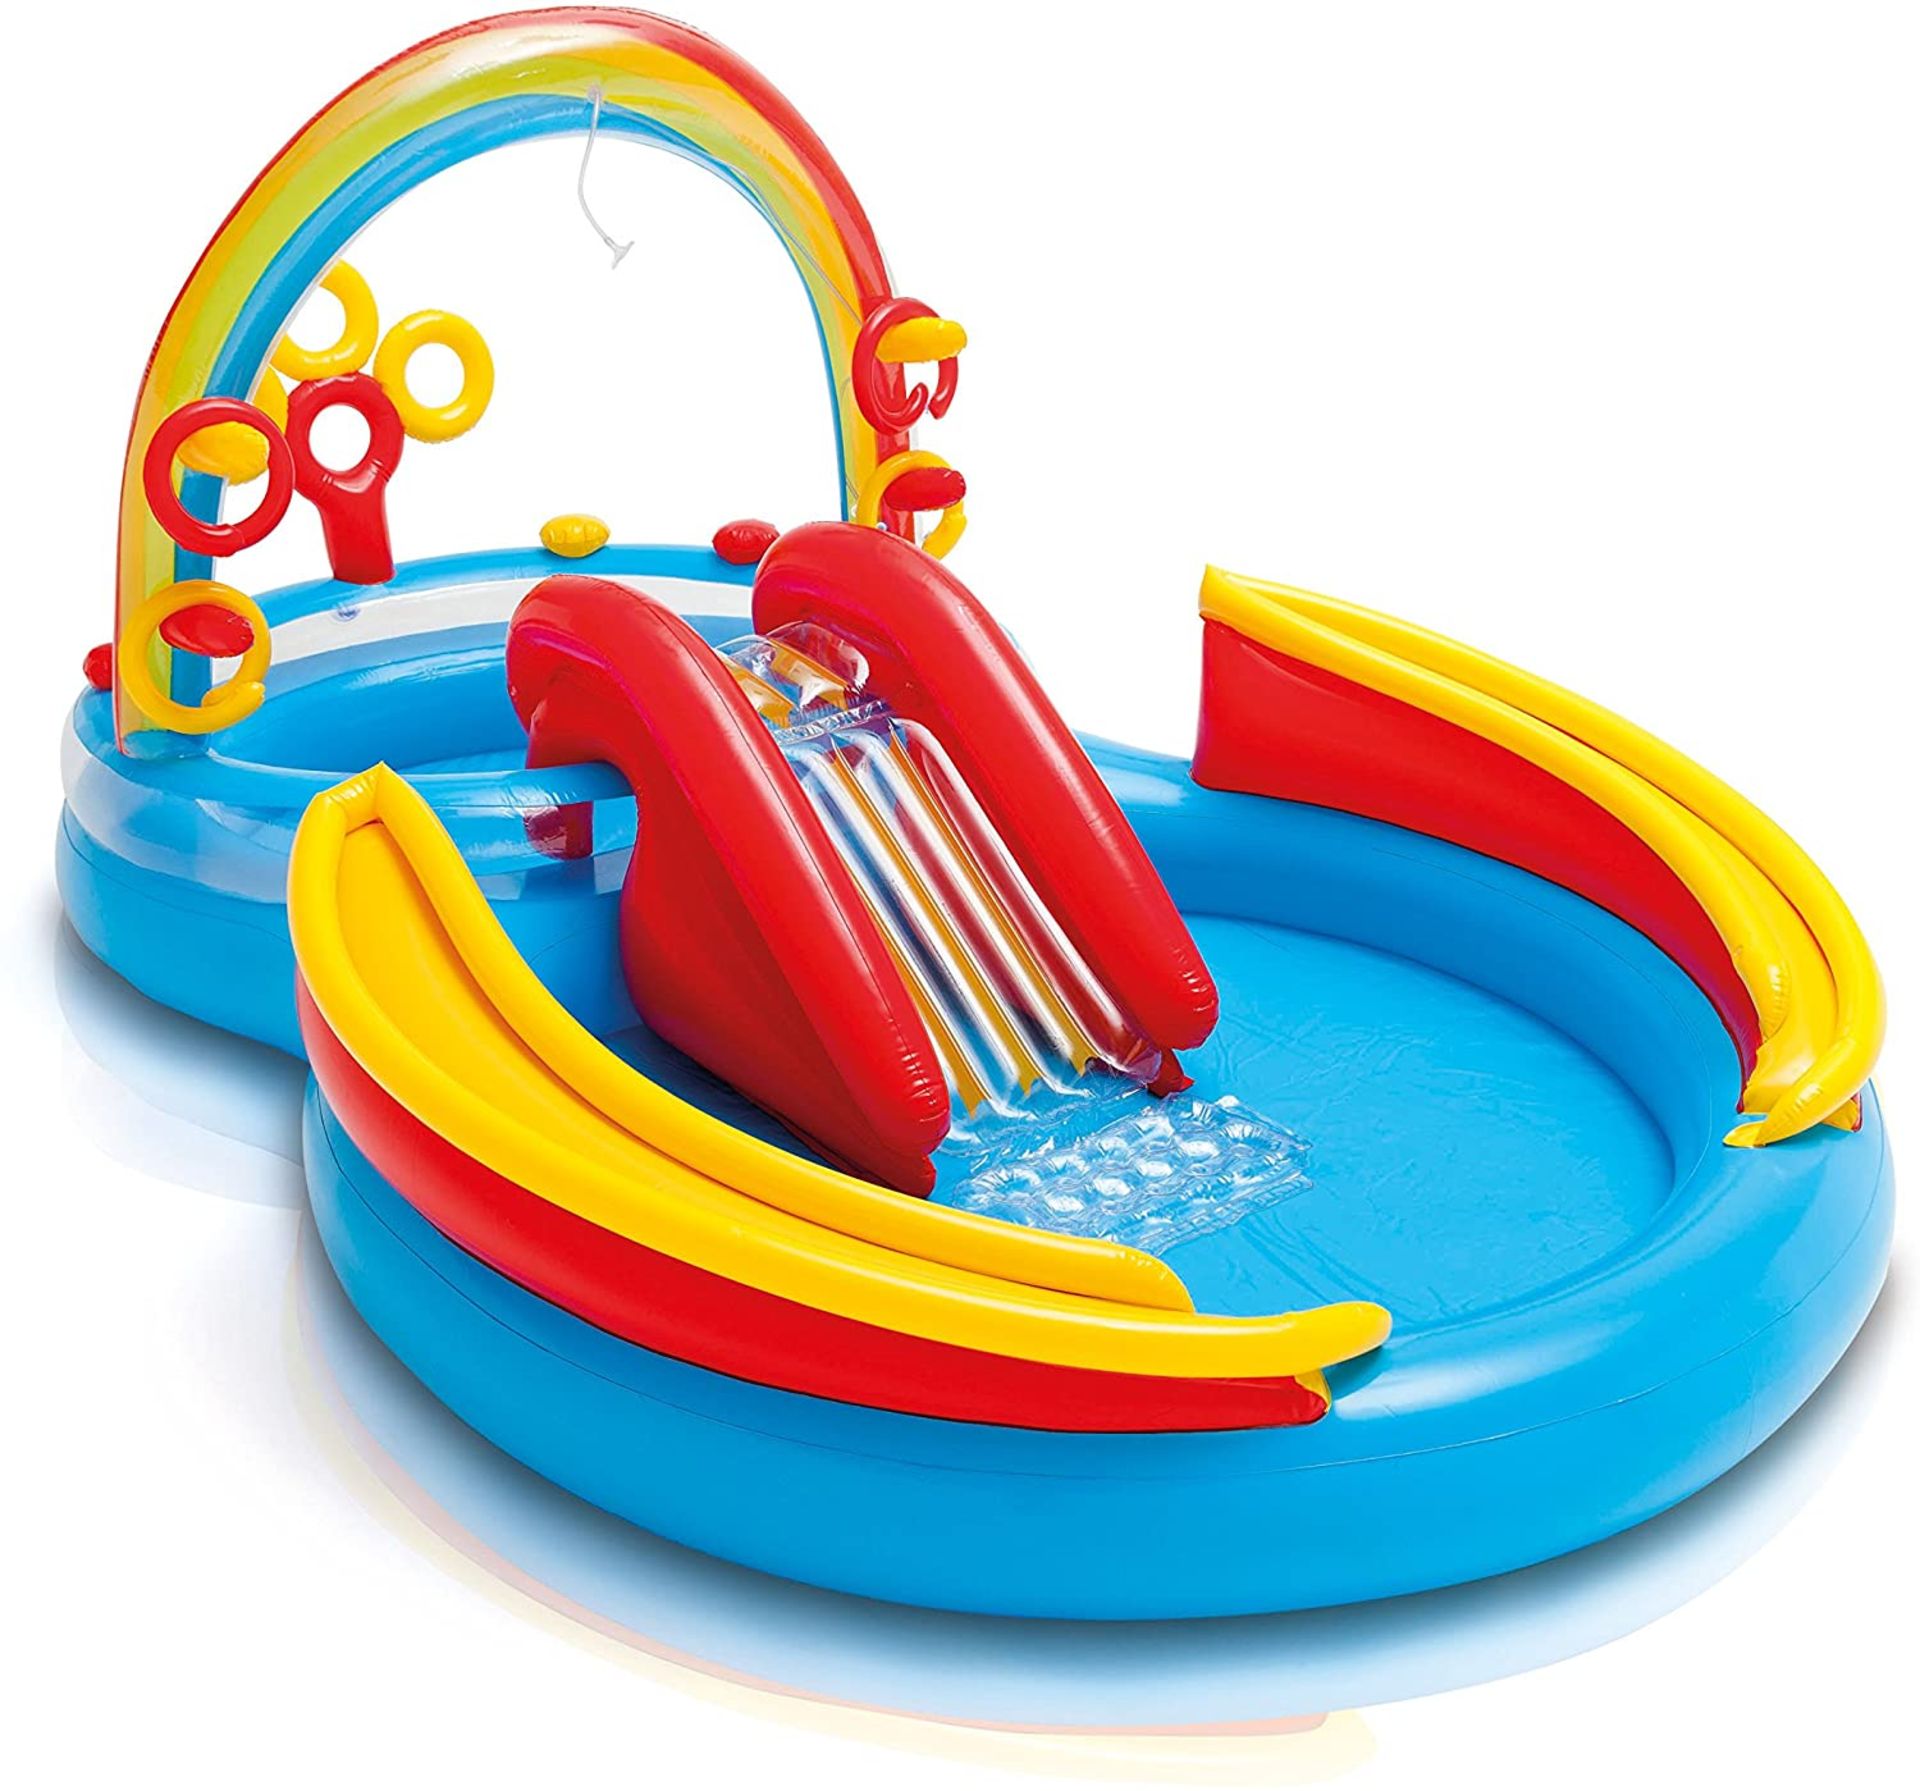 1 INTEX RAINBOW RING PLAY CENTRE RRP Â£99 (GENERIC IMAGE GUIDE)